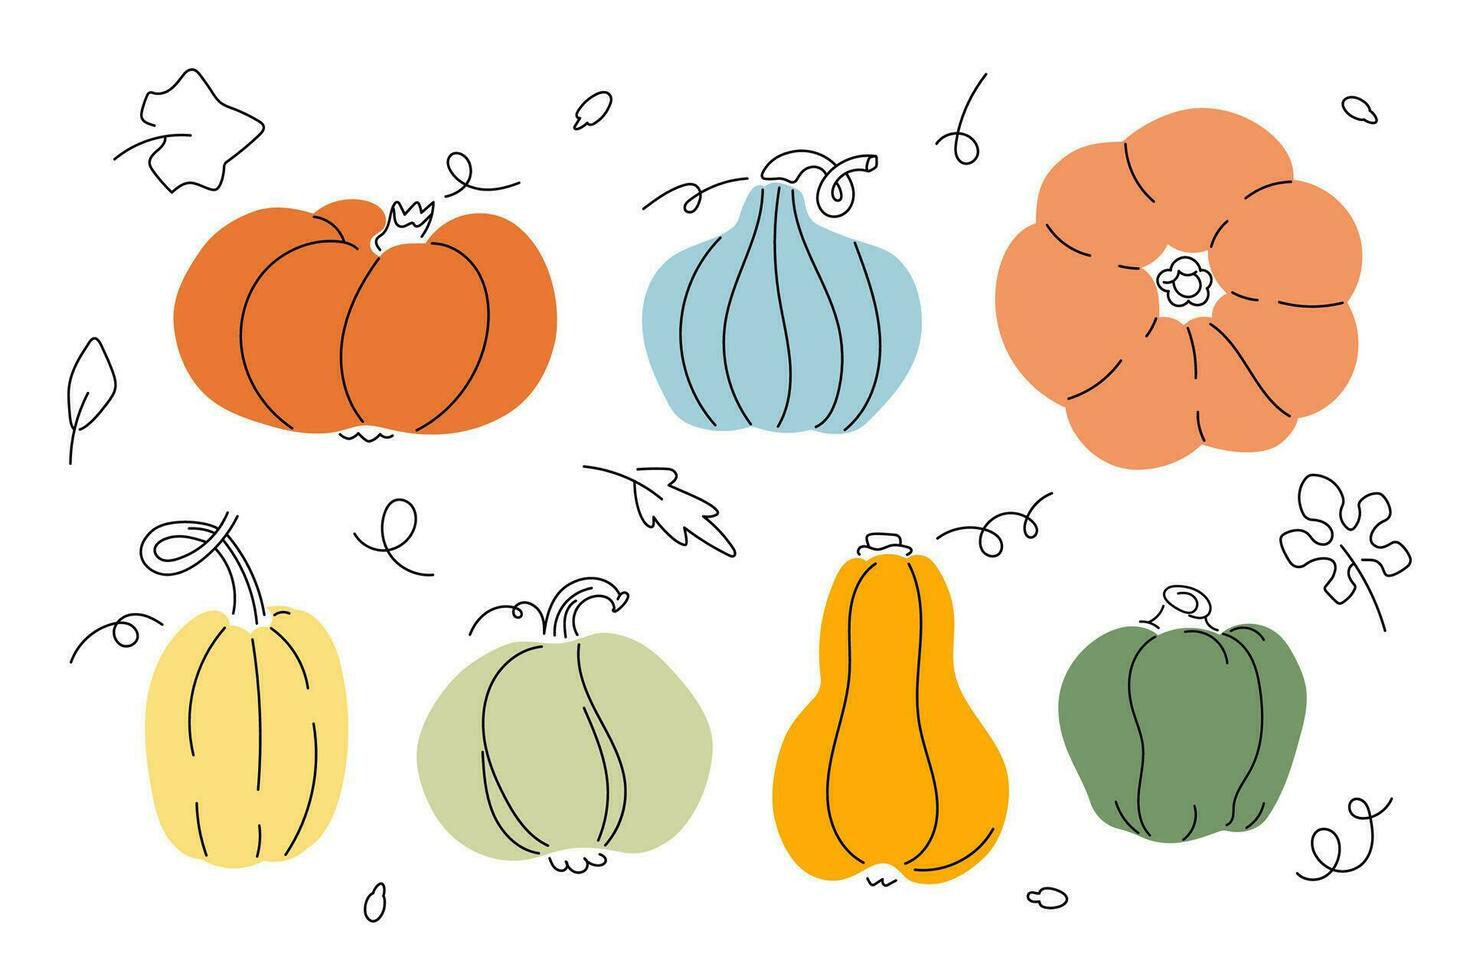 Pumpkins and leaves flat vector illustrations set. Collection of varios mixed style autumn color pumpkins with hand drawn decorative elements.